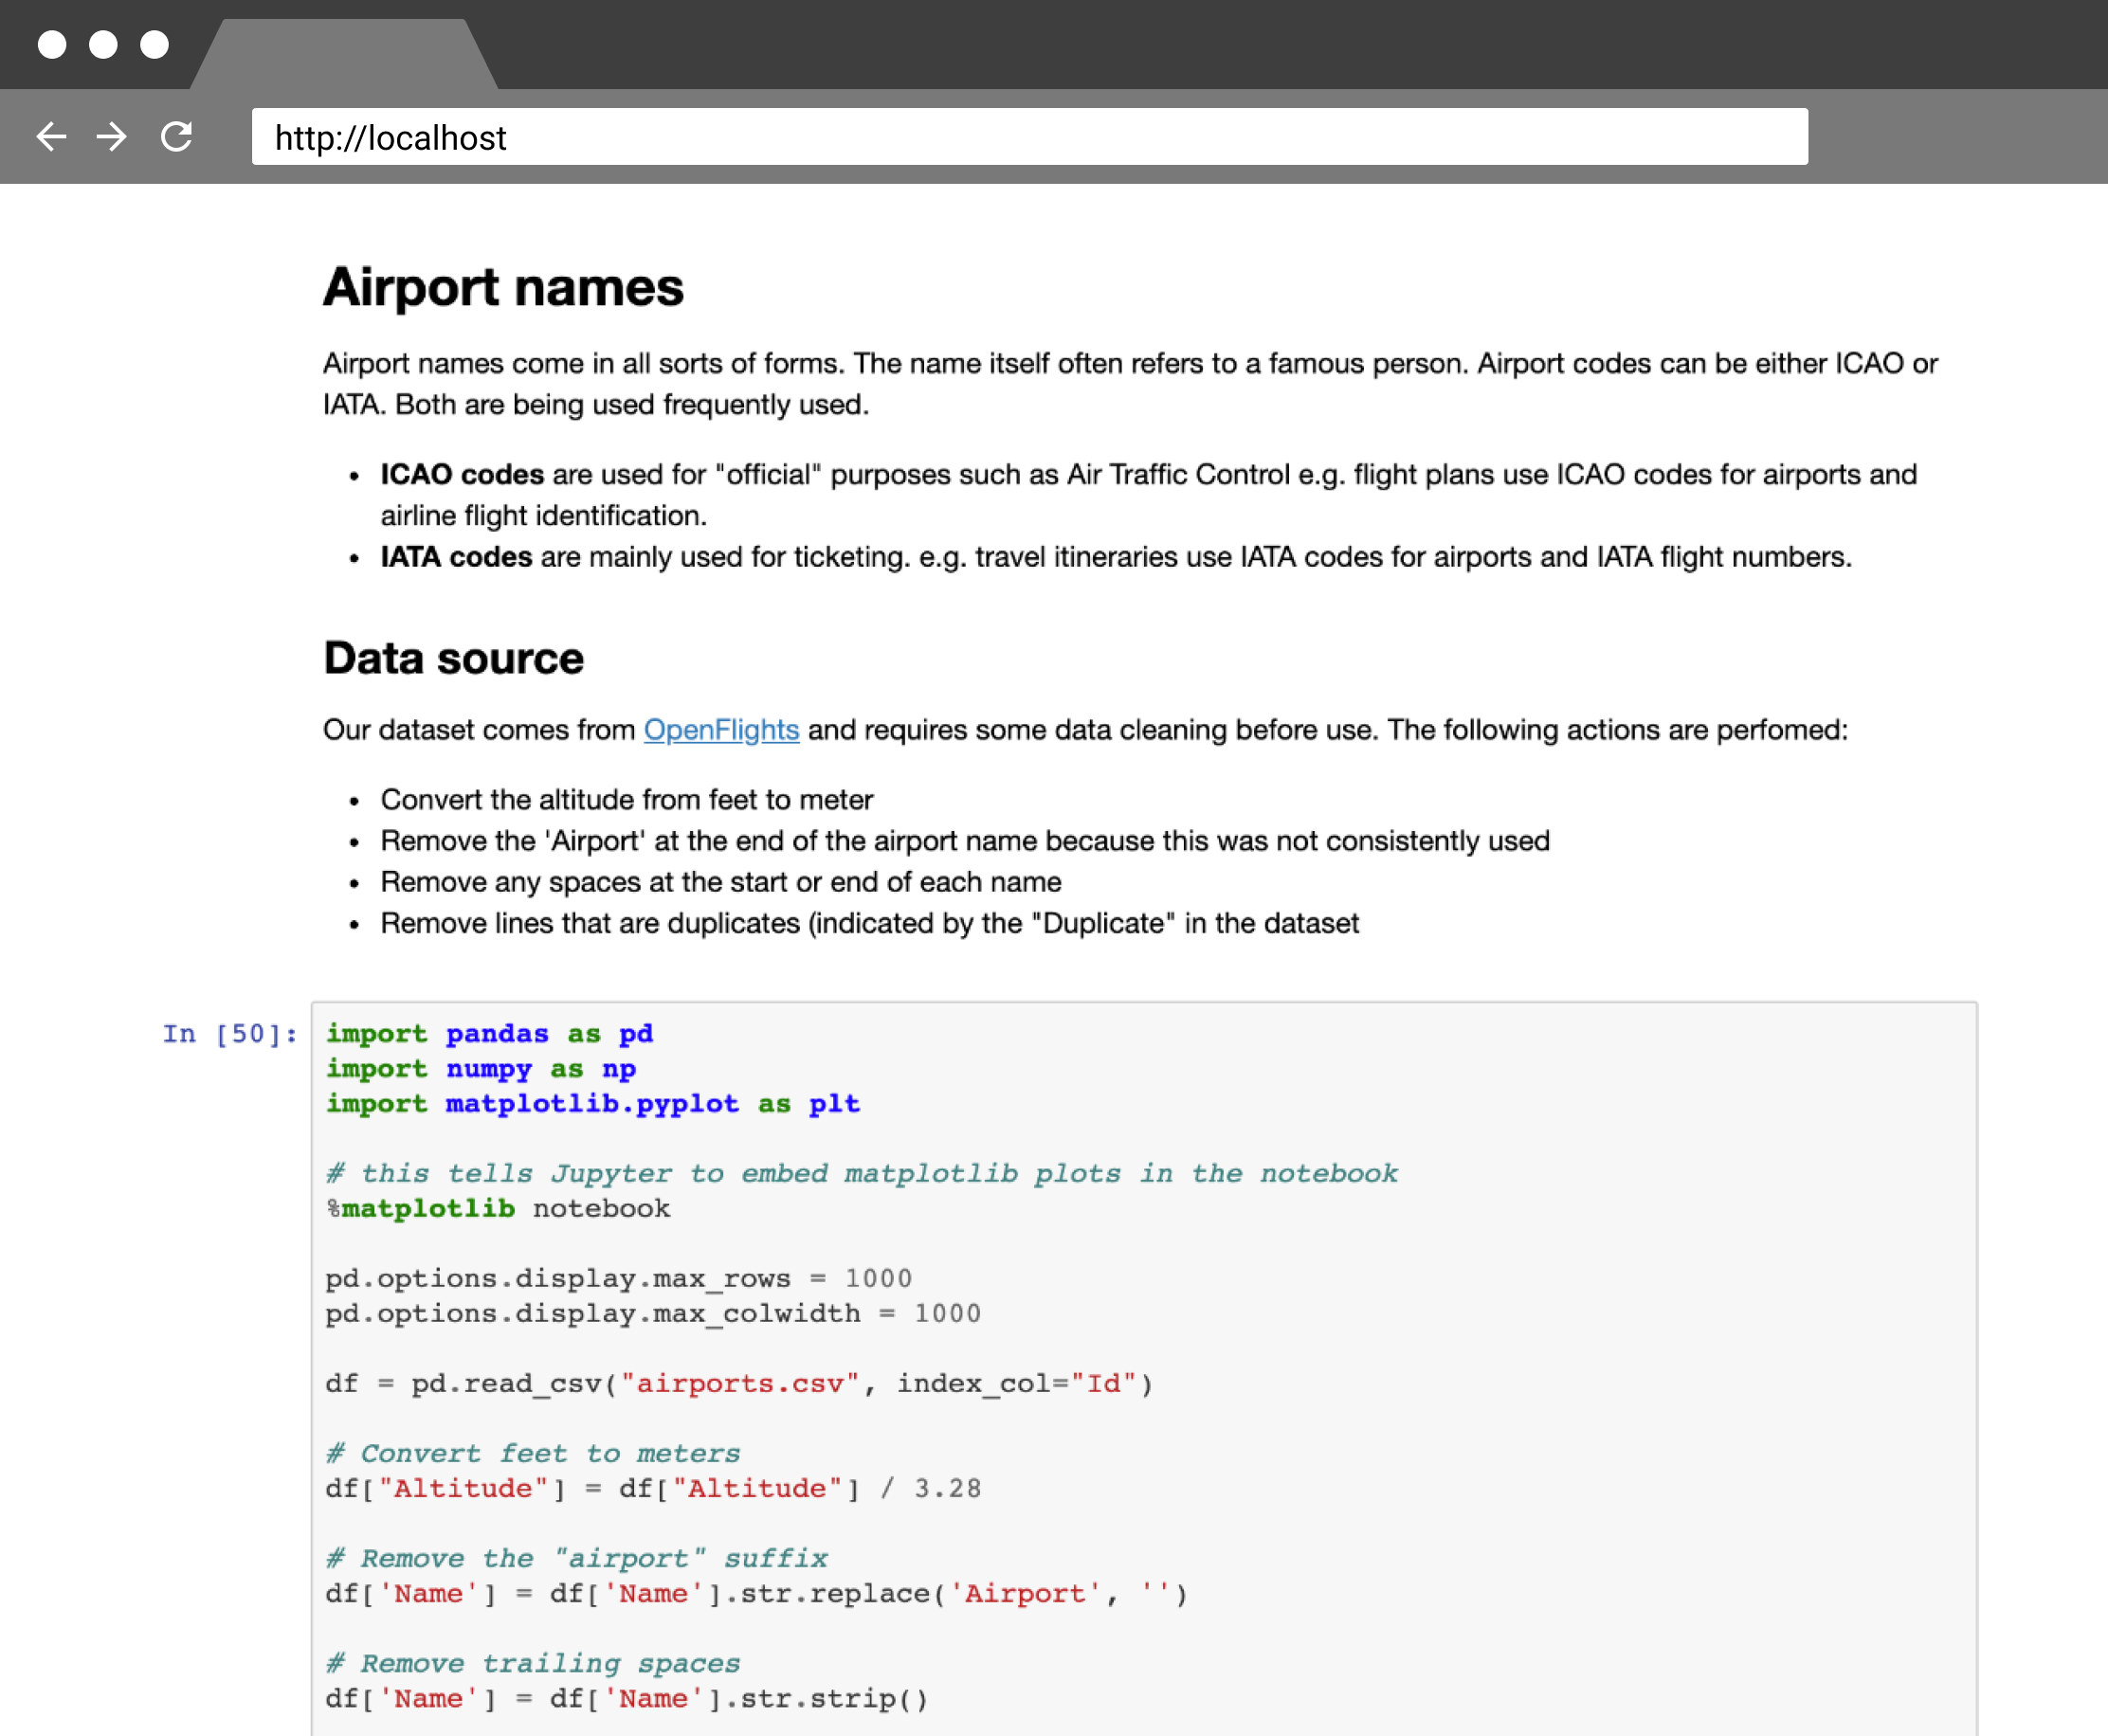 An example of a Jupyter Notebook for airport data, combining code and text